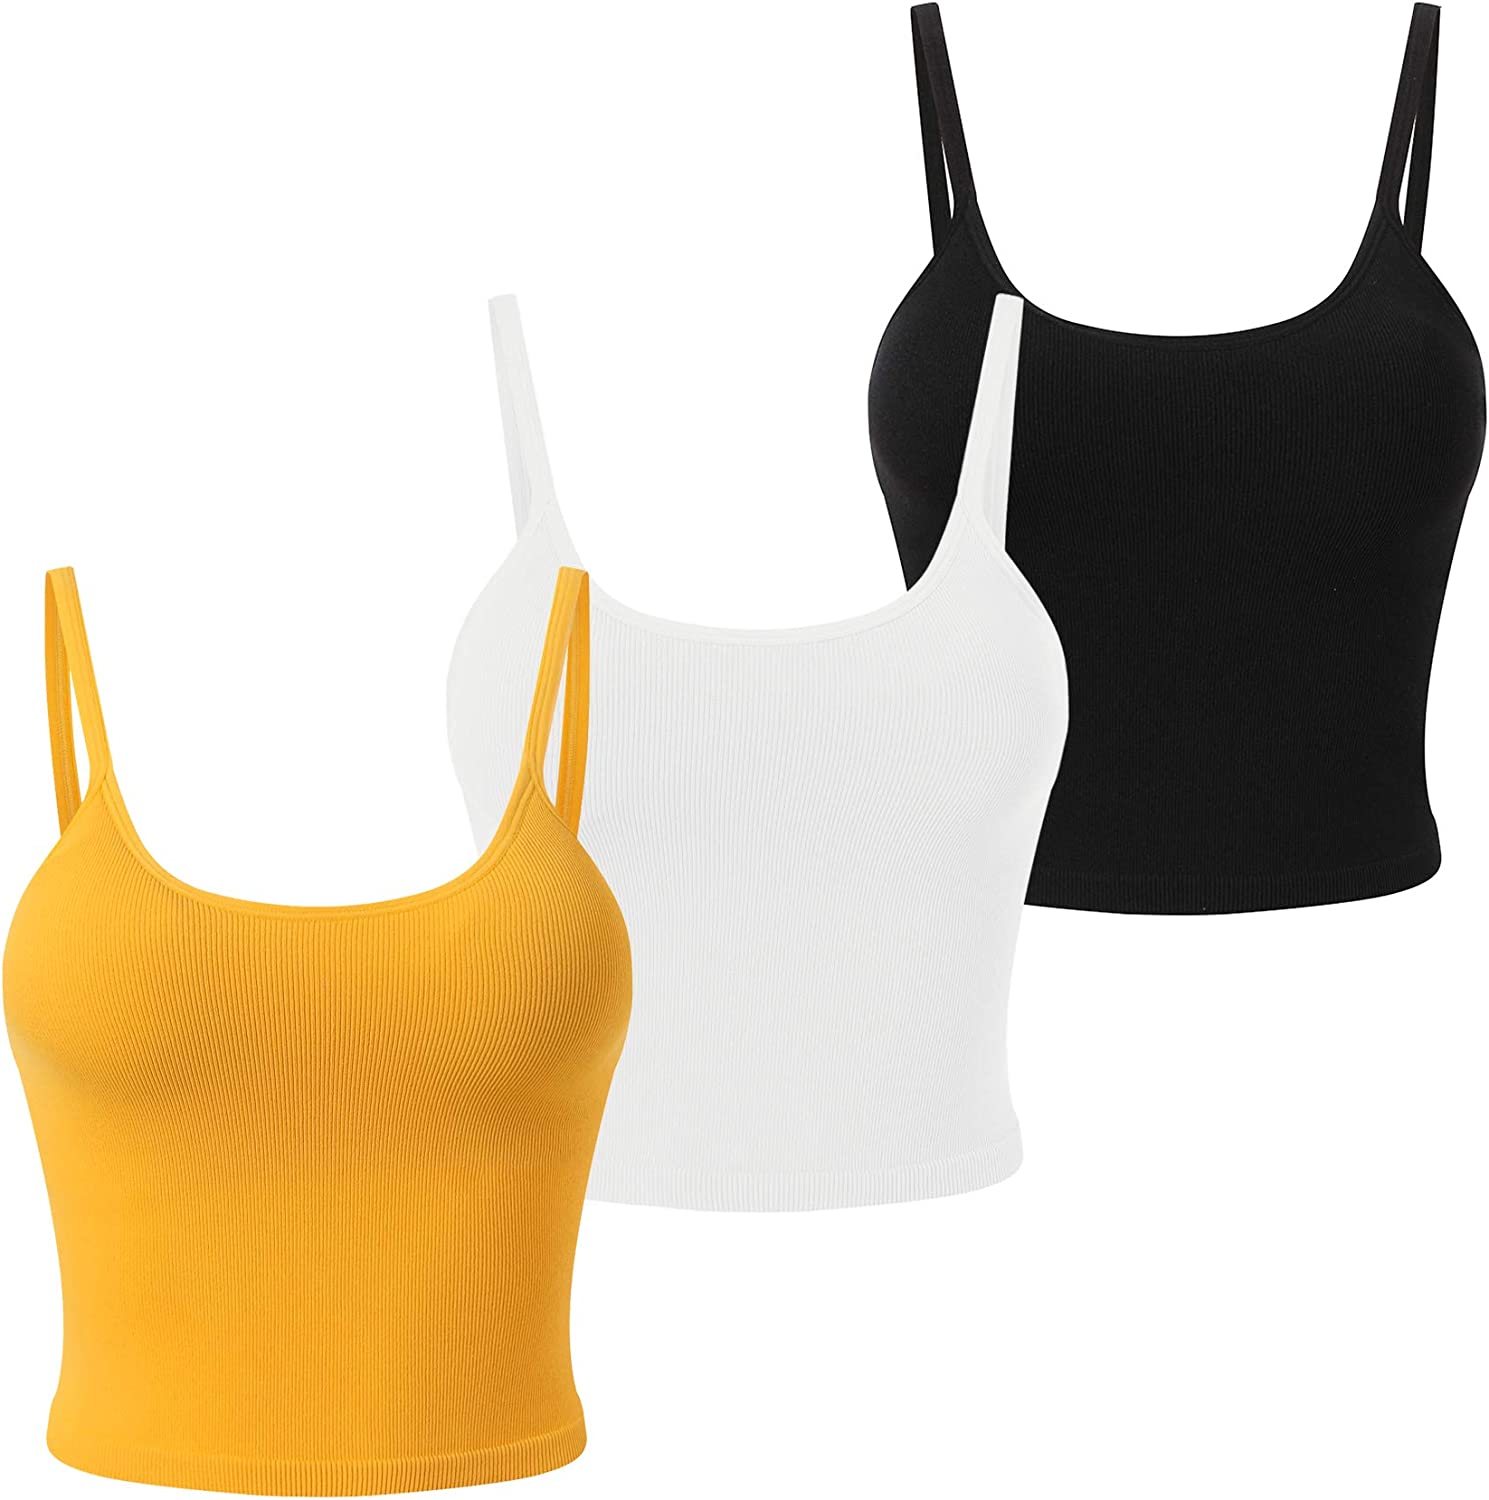 Best Deal for MAVOUR COUTURE Longline Sports Bra Tank Tops for Women